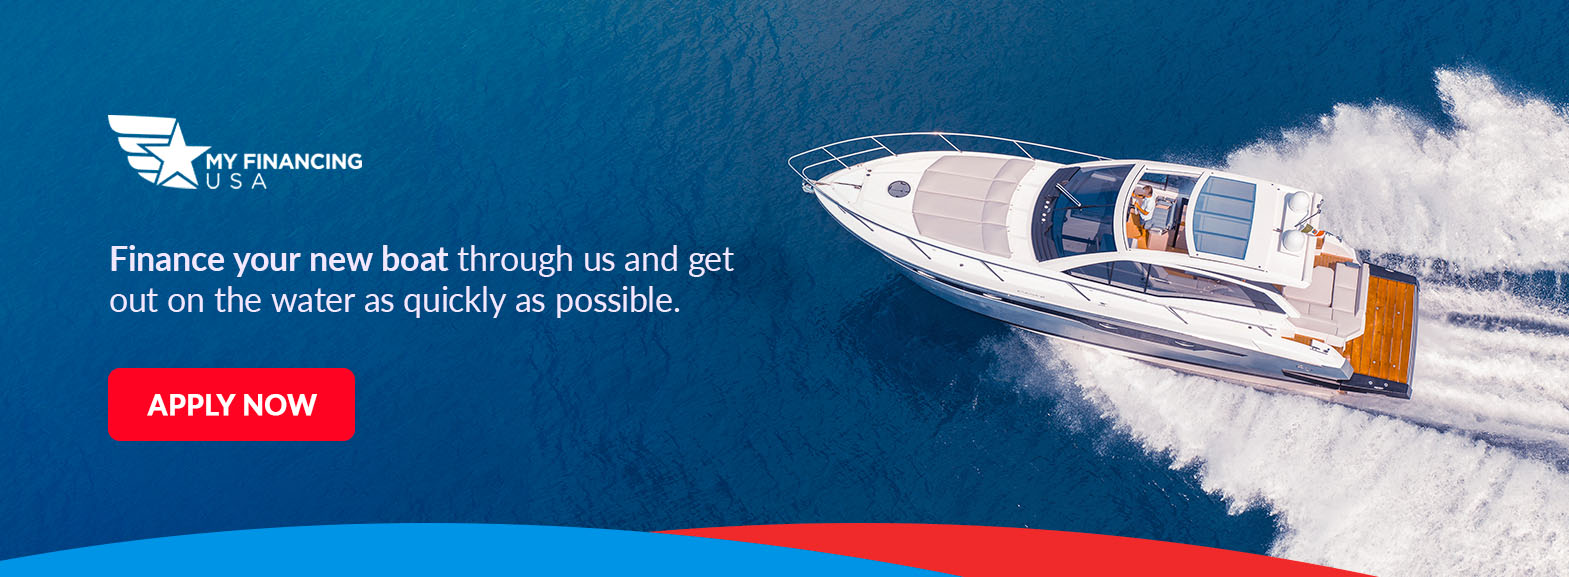 Finance your new boat through us and get out on the water as quickly as possible. Apply now!